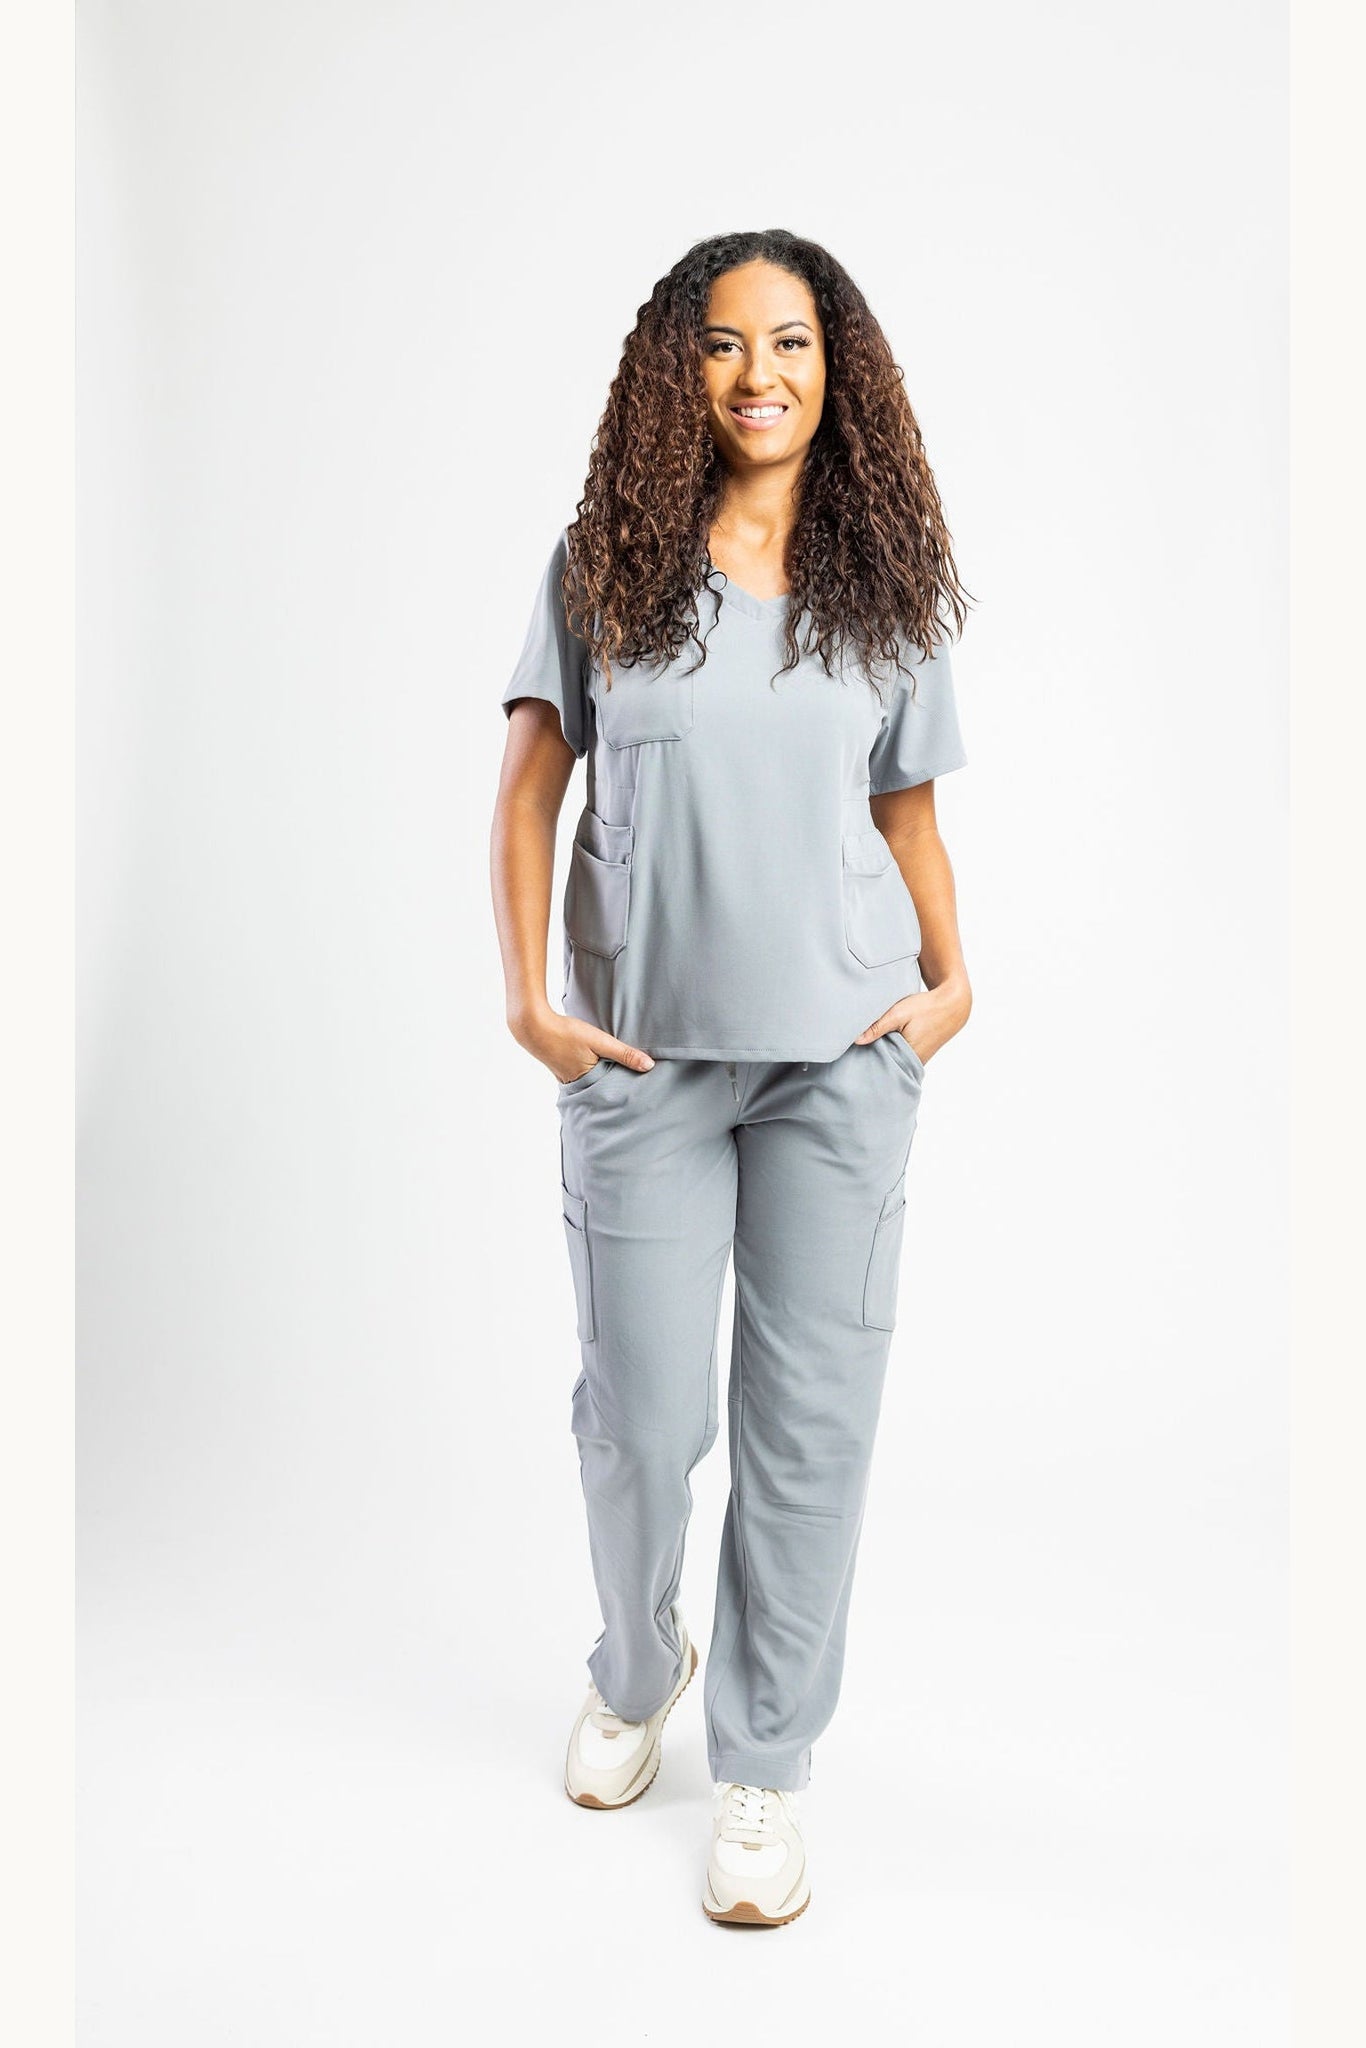 Apollo Scrubs - Hers - The Utility Tops for women, antimicrobial, V-Neck shirt